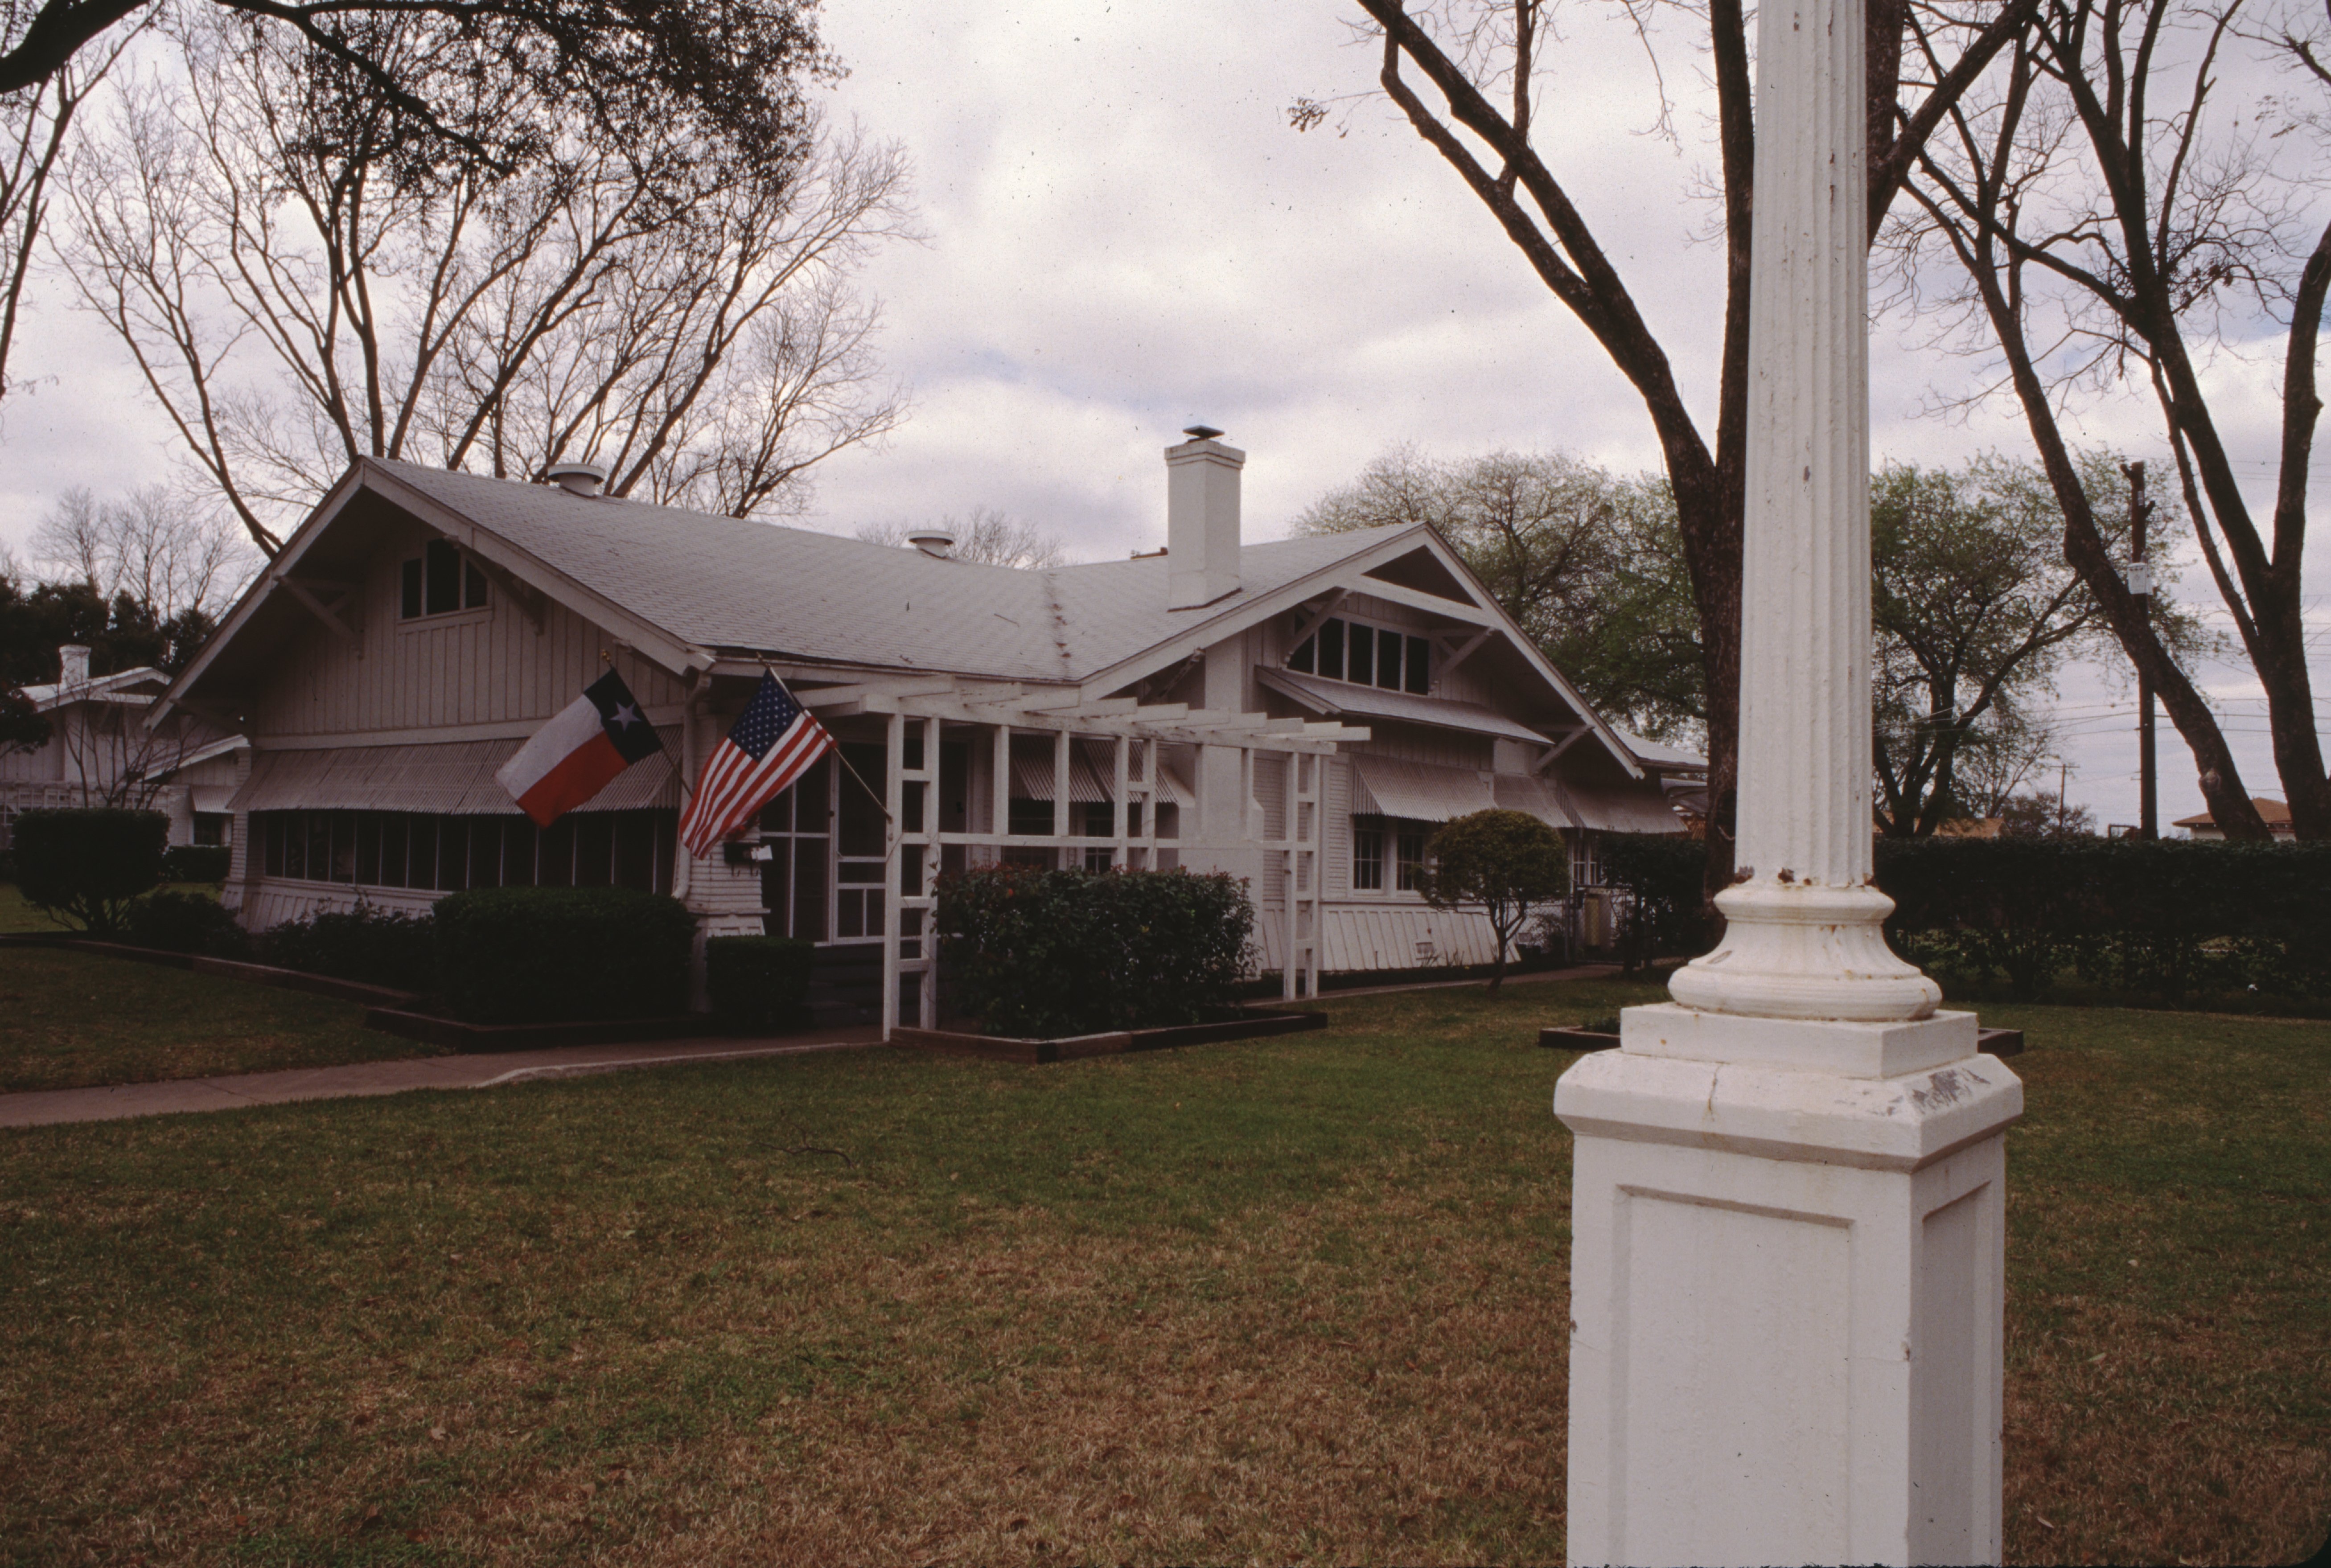 Kelly AFB - Bungalow Colony
                        